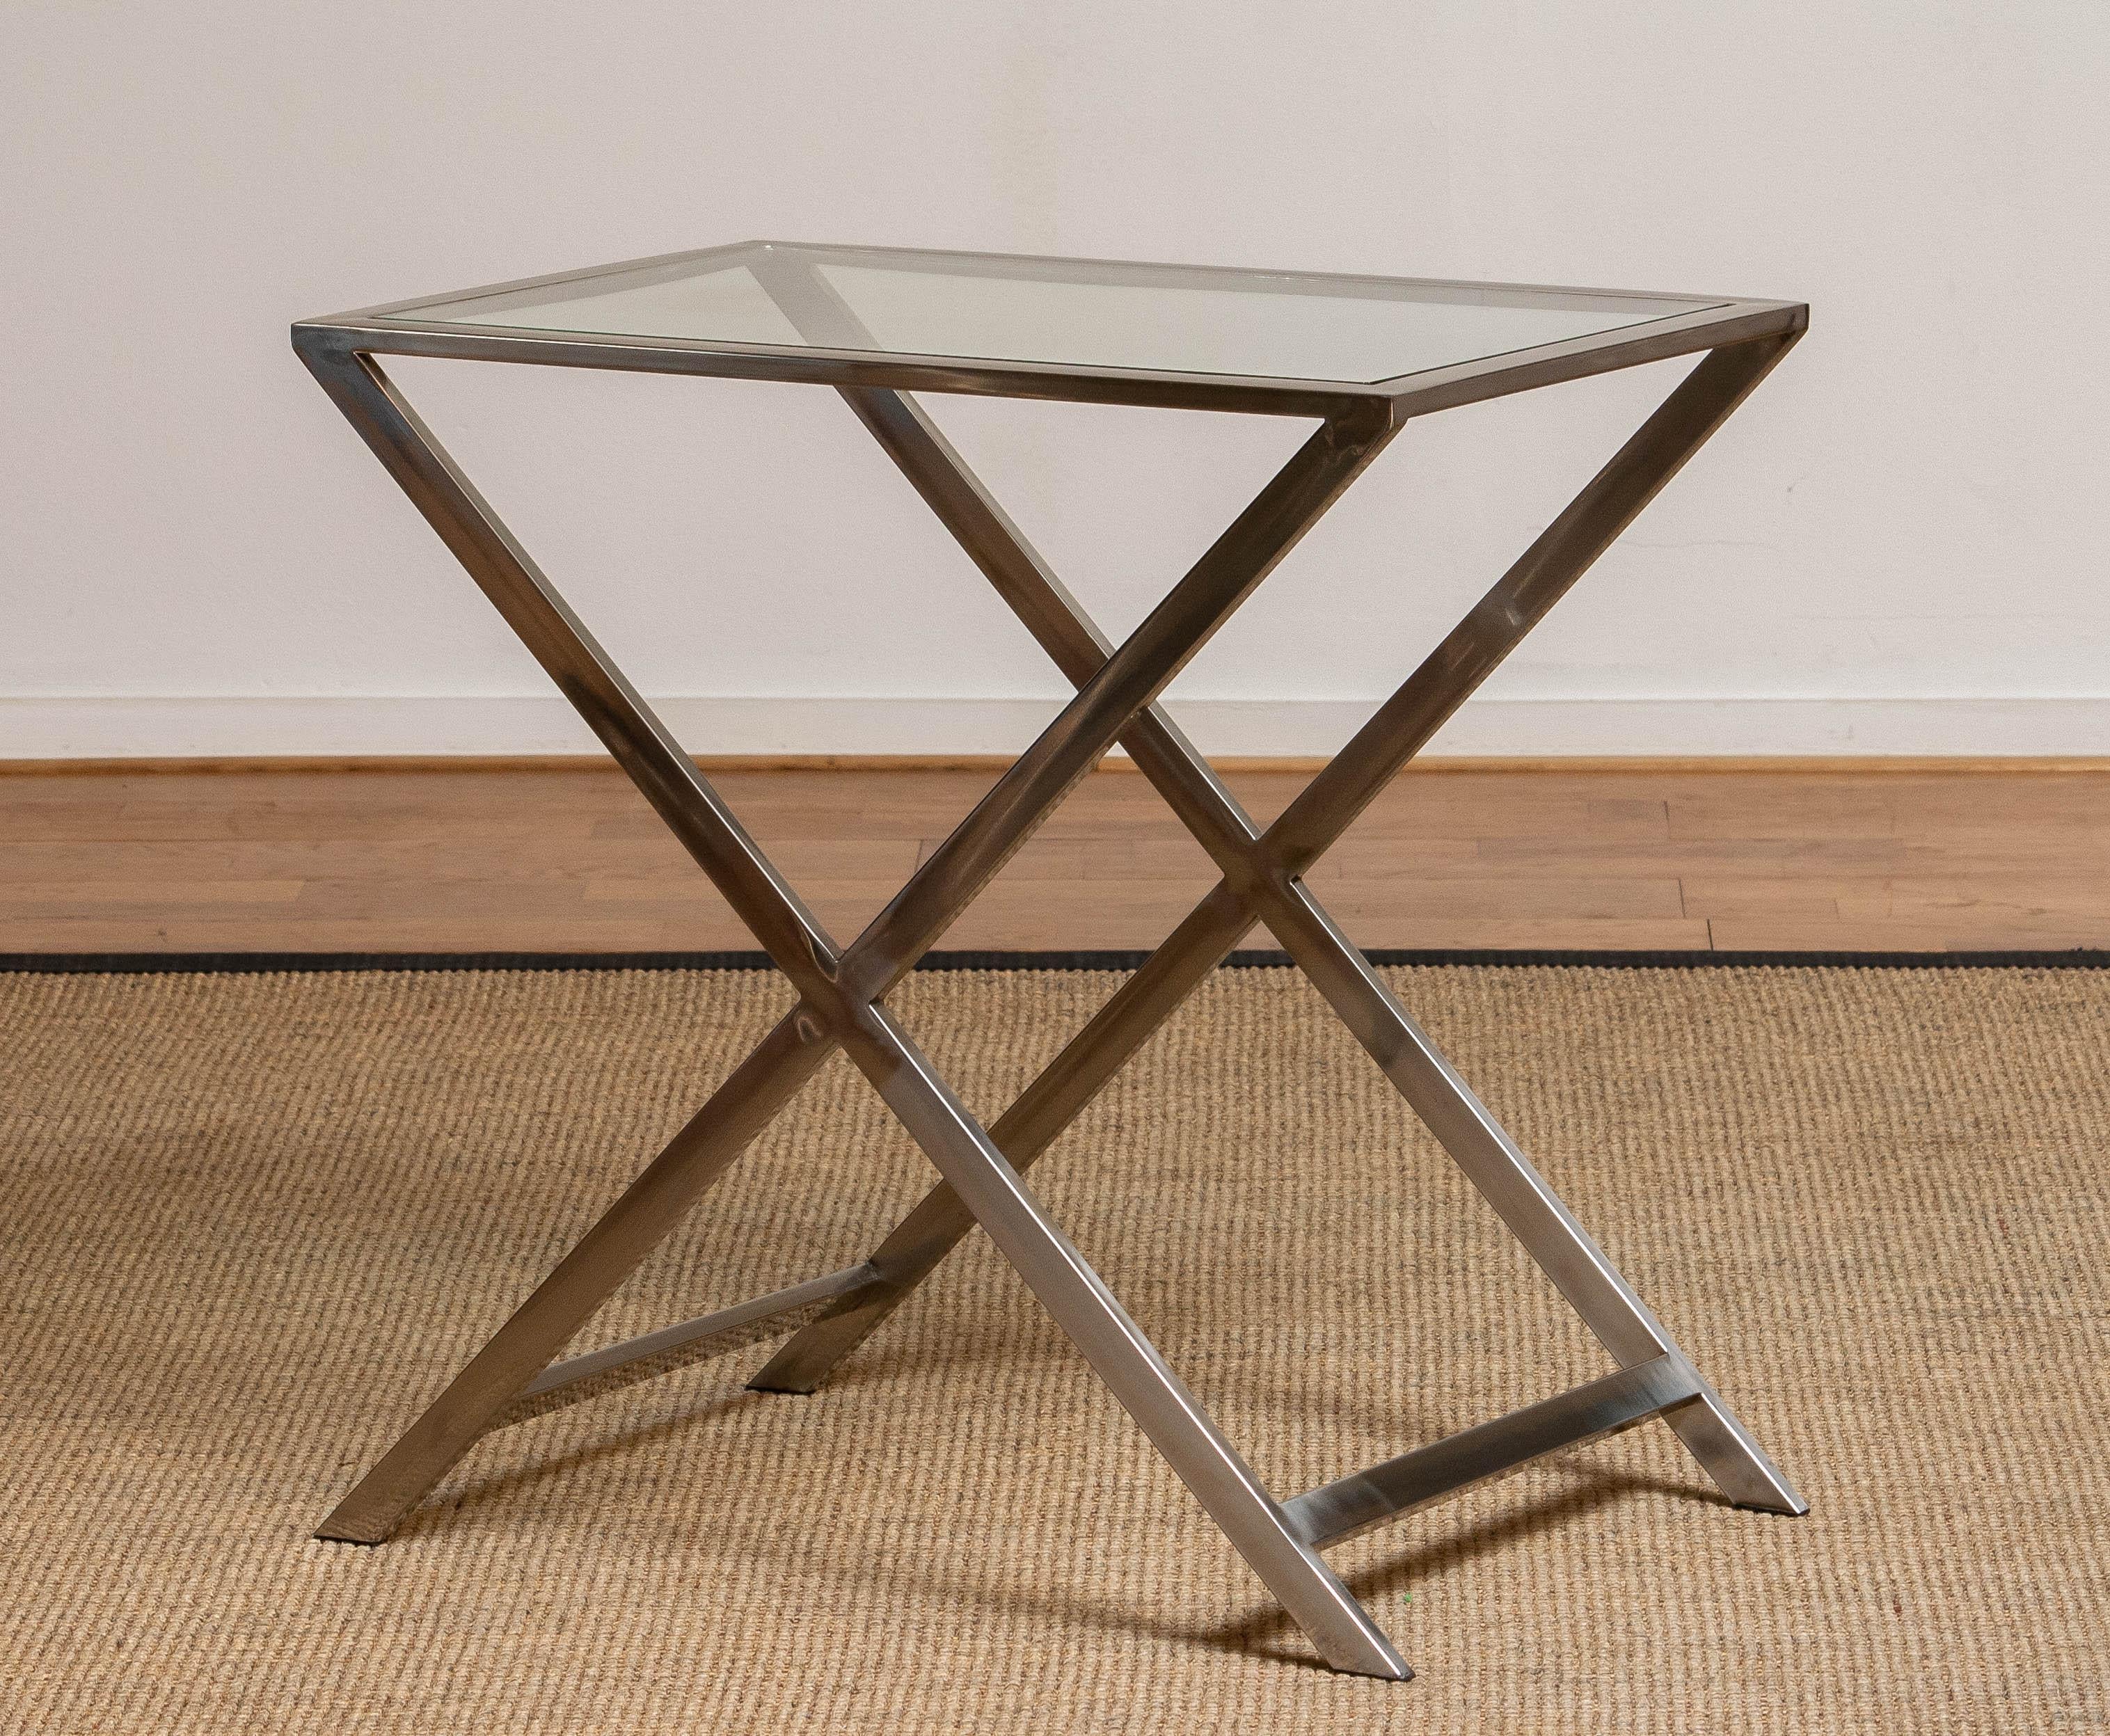 Cross legs site table with glass top in chromed metal and in the style of Milo Baughman. Beautiful welded and in overall good condition.